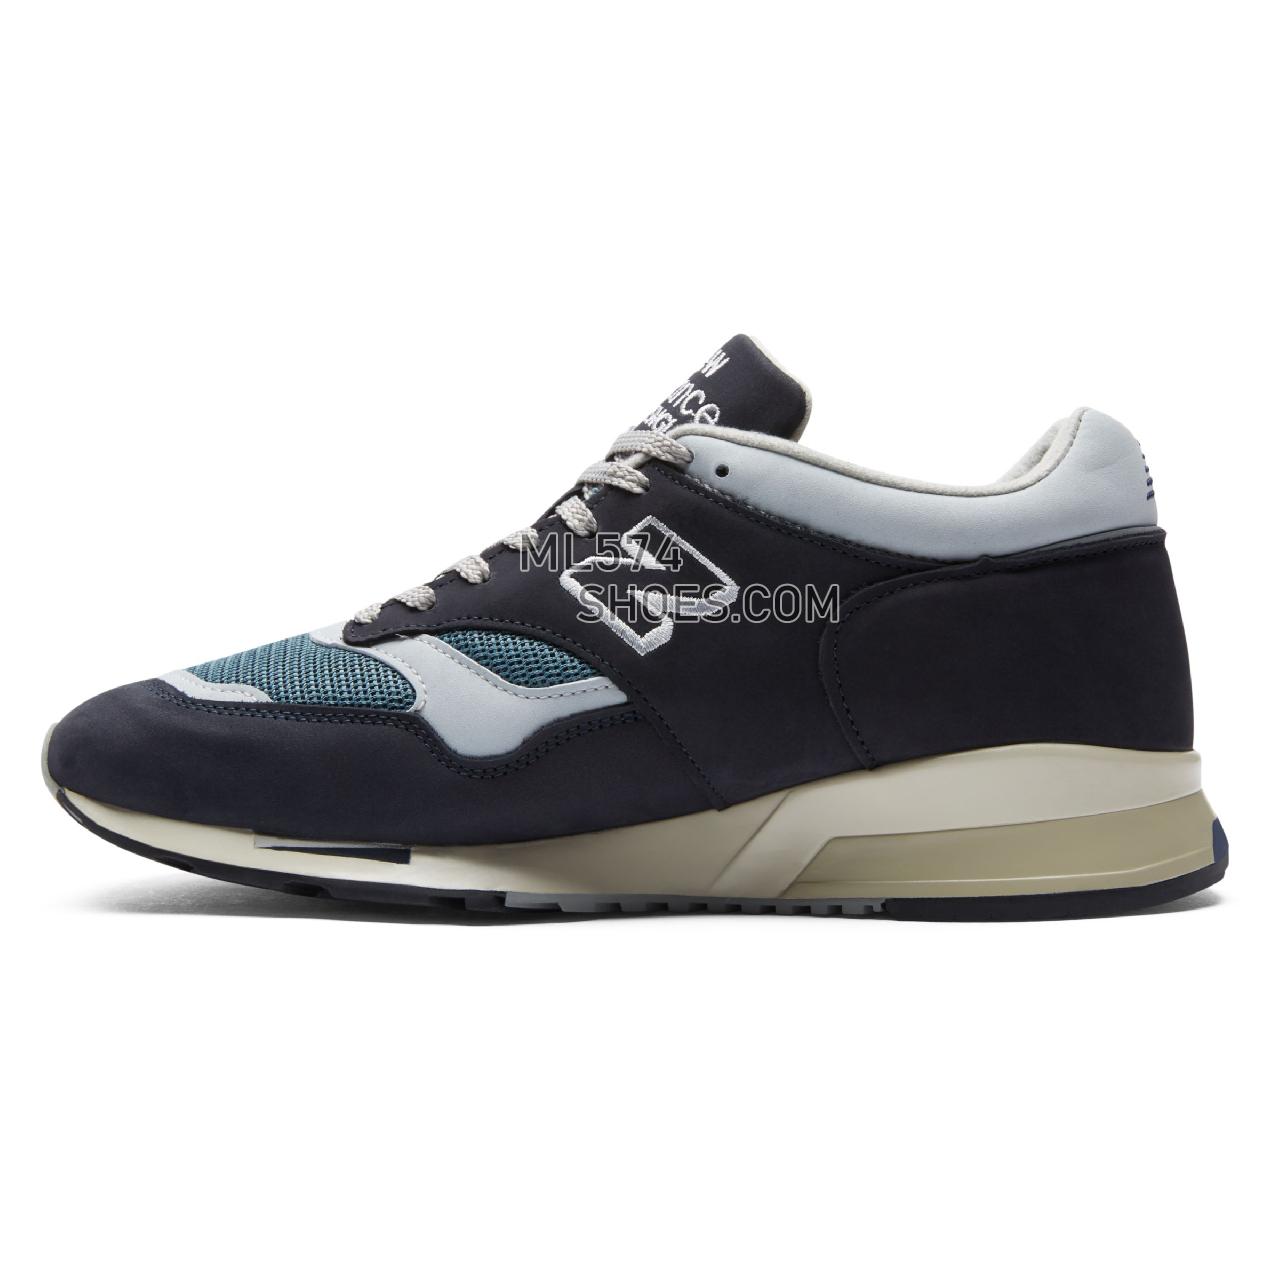 New Balance Made in UK 1500 Nubuck - Men's 1500 Nubuck - Navy with Grey and Petrol - M1500OGN